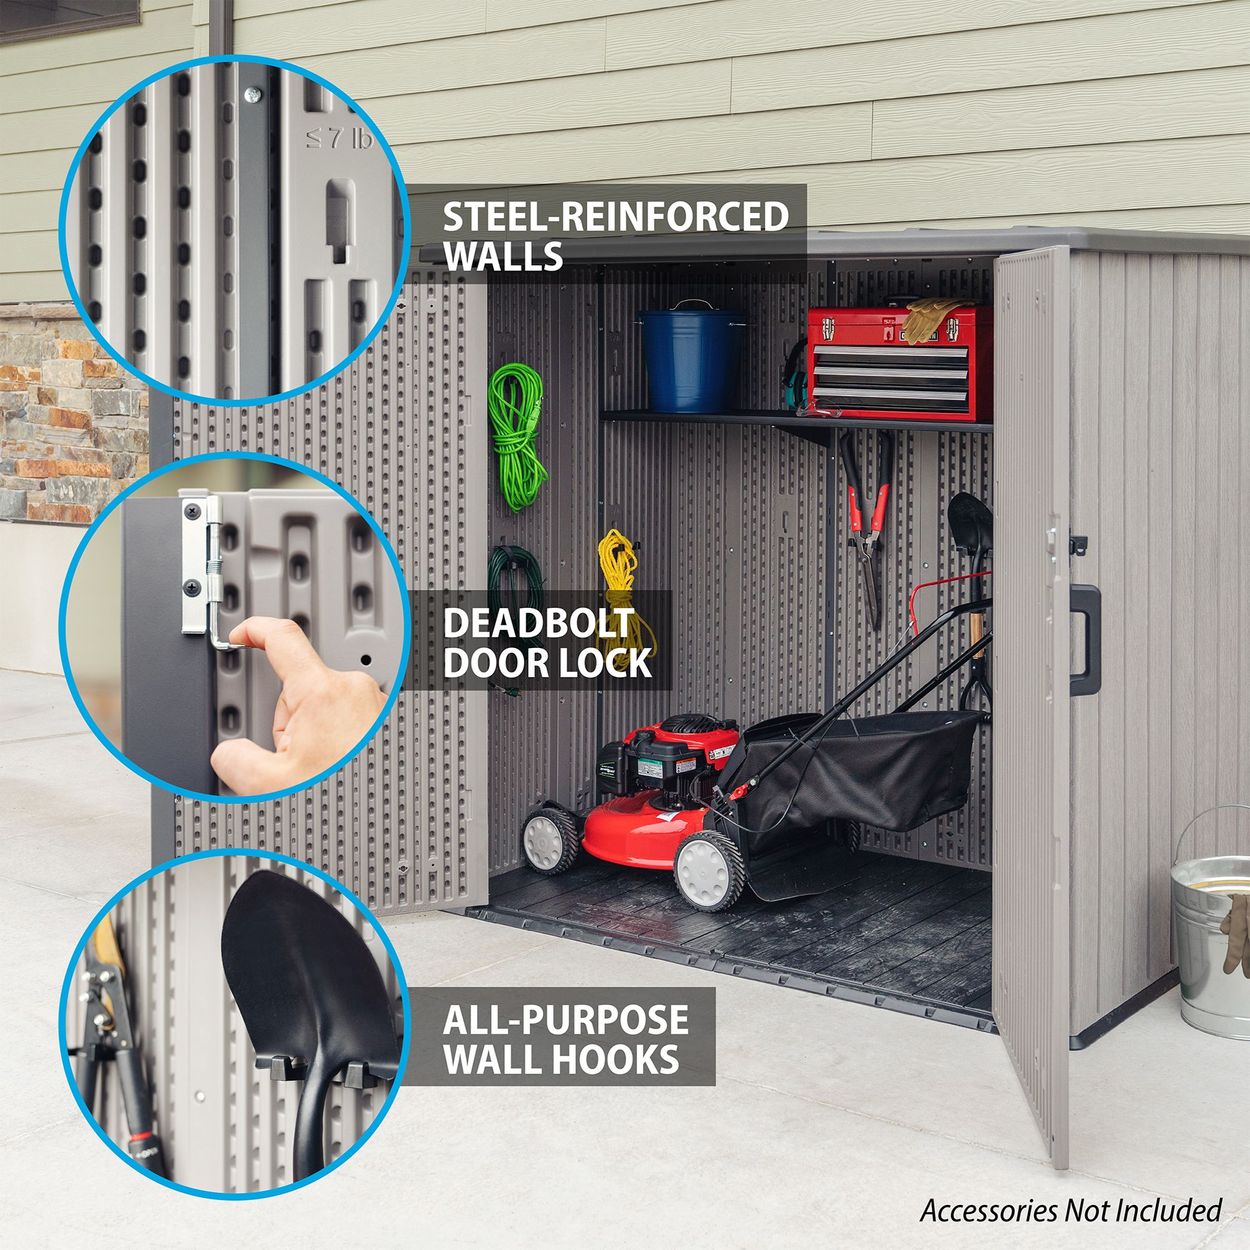 Open Utility shed showing a mower and items on the shelf inside, along with 3 information bubbles showing Steel-Reinforced Walls, deadbolt door lock, and All-Purpose wall hooks.